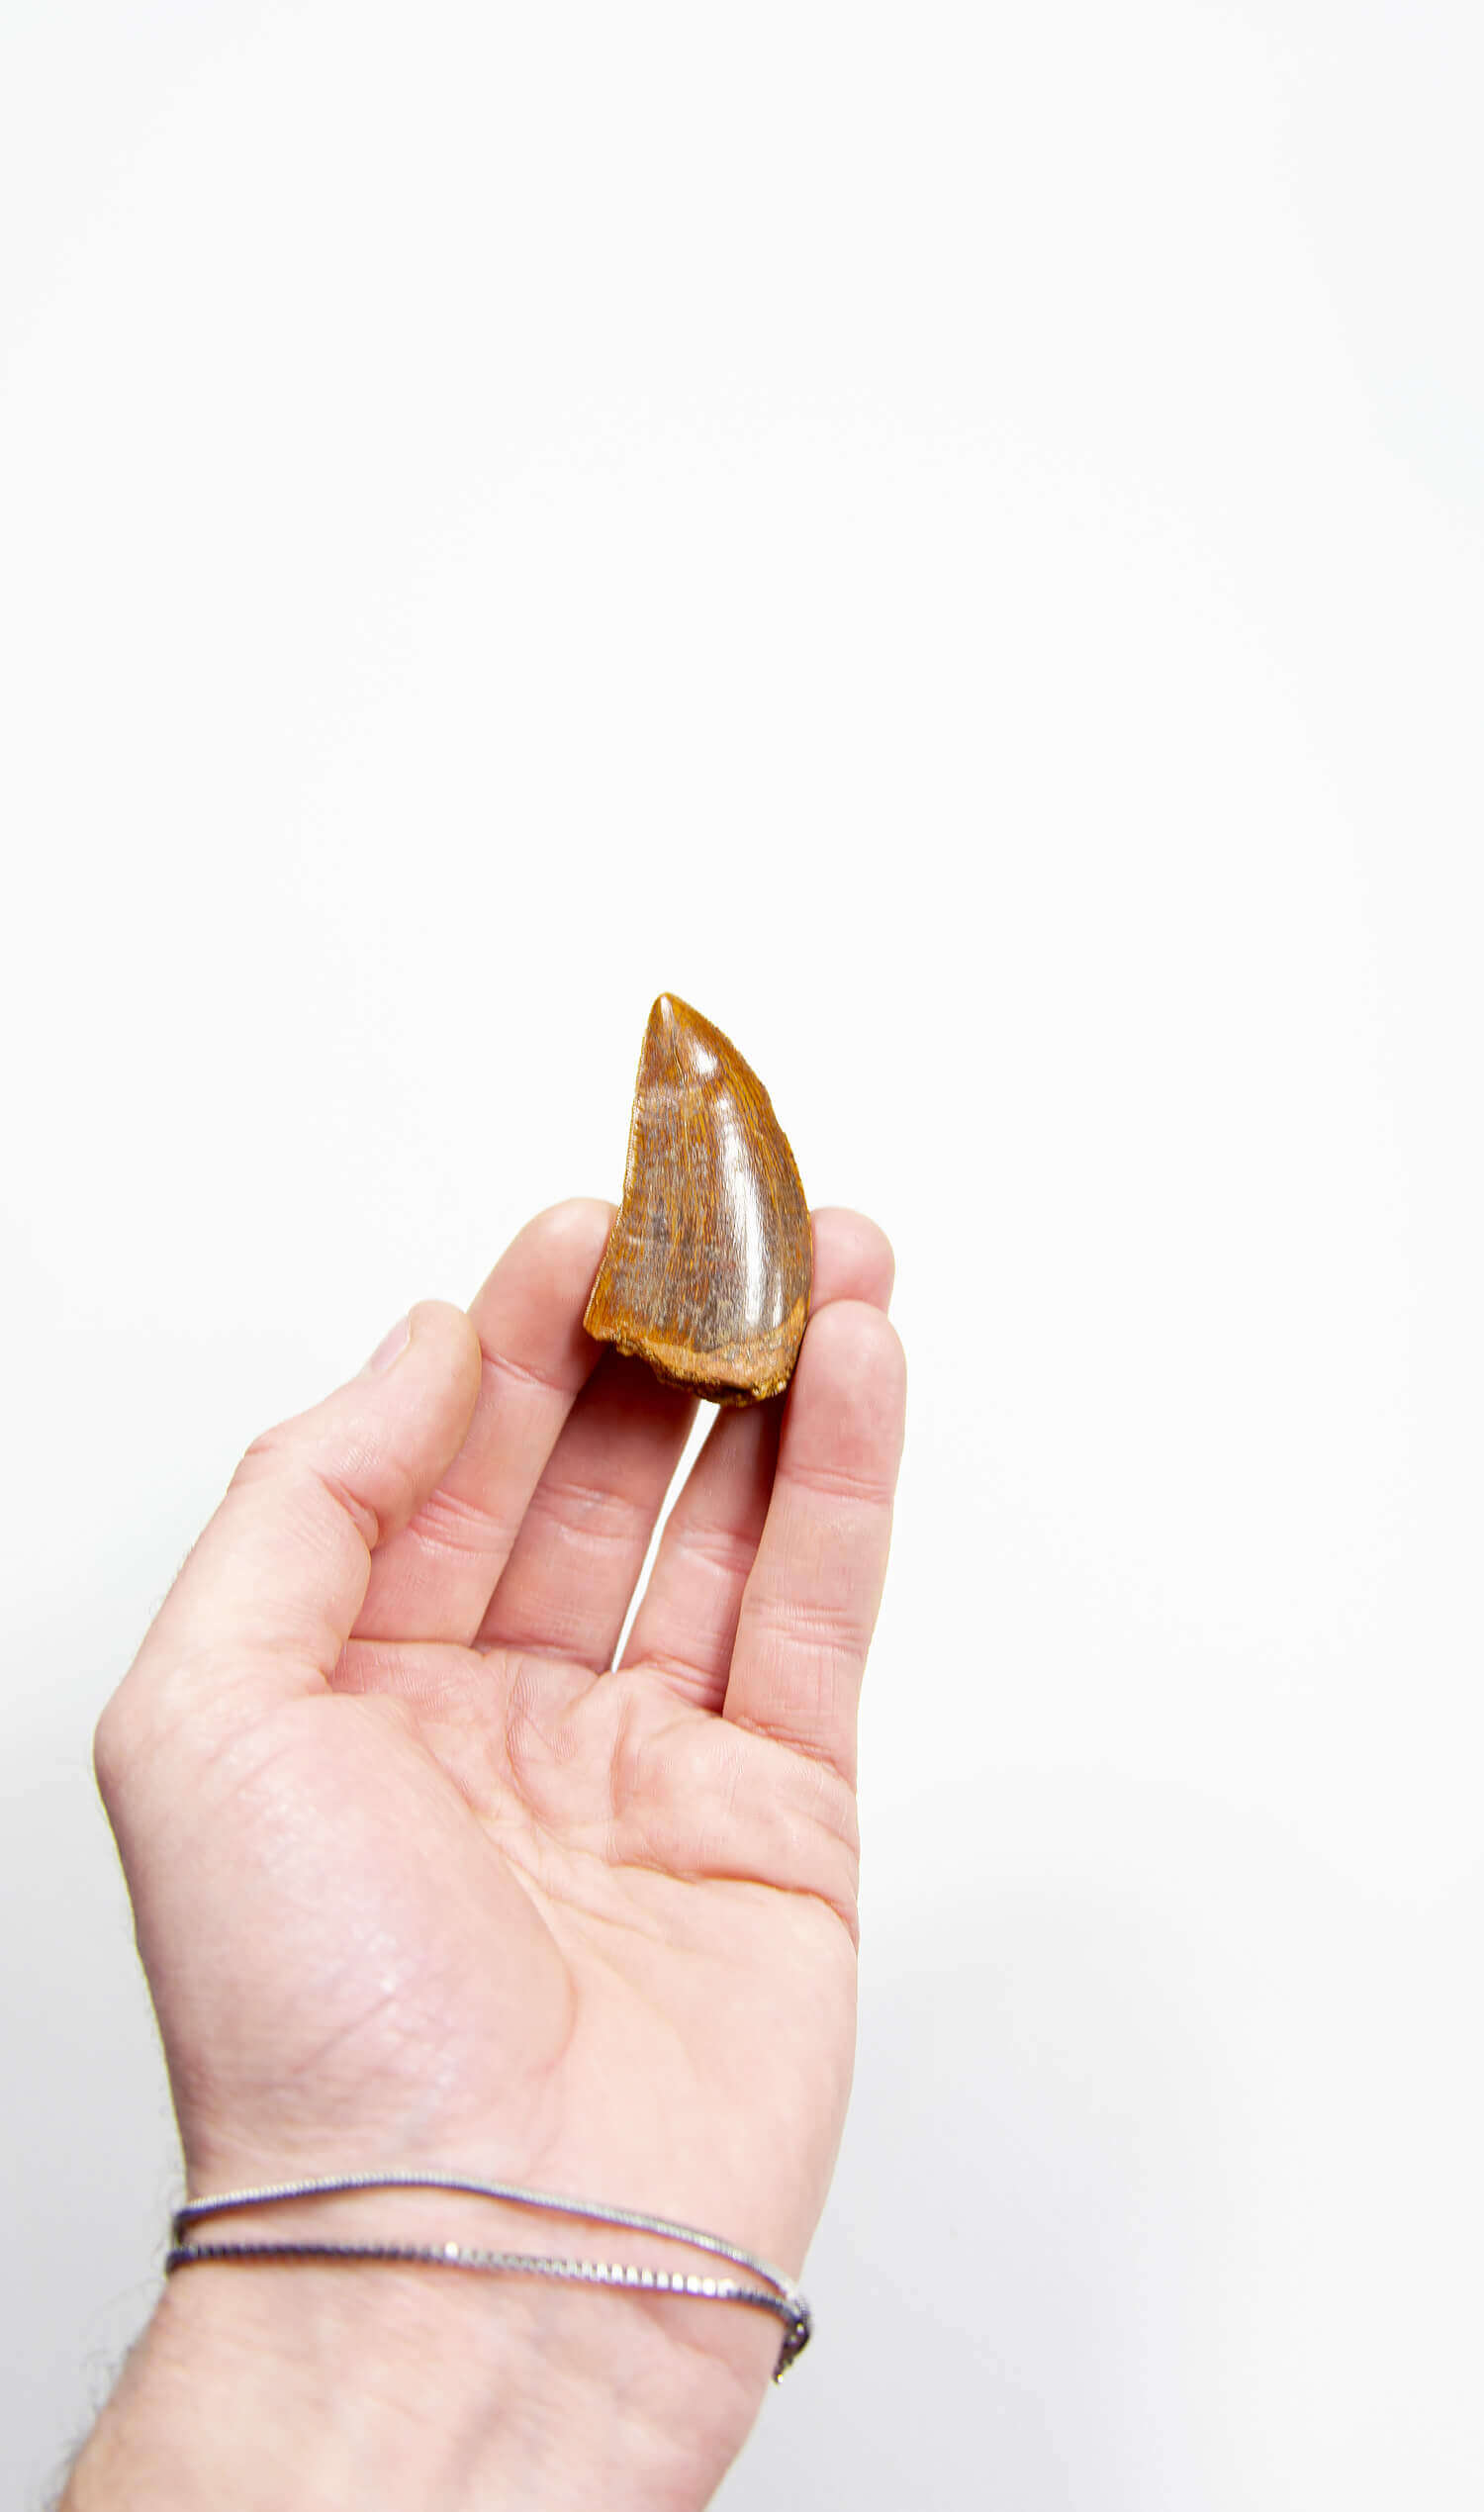 real fossil dinosaur carcharodontosaurus tooth for sale at the uk fossil store 31